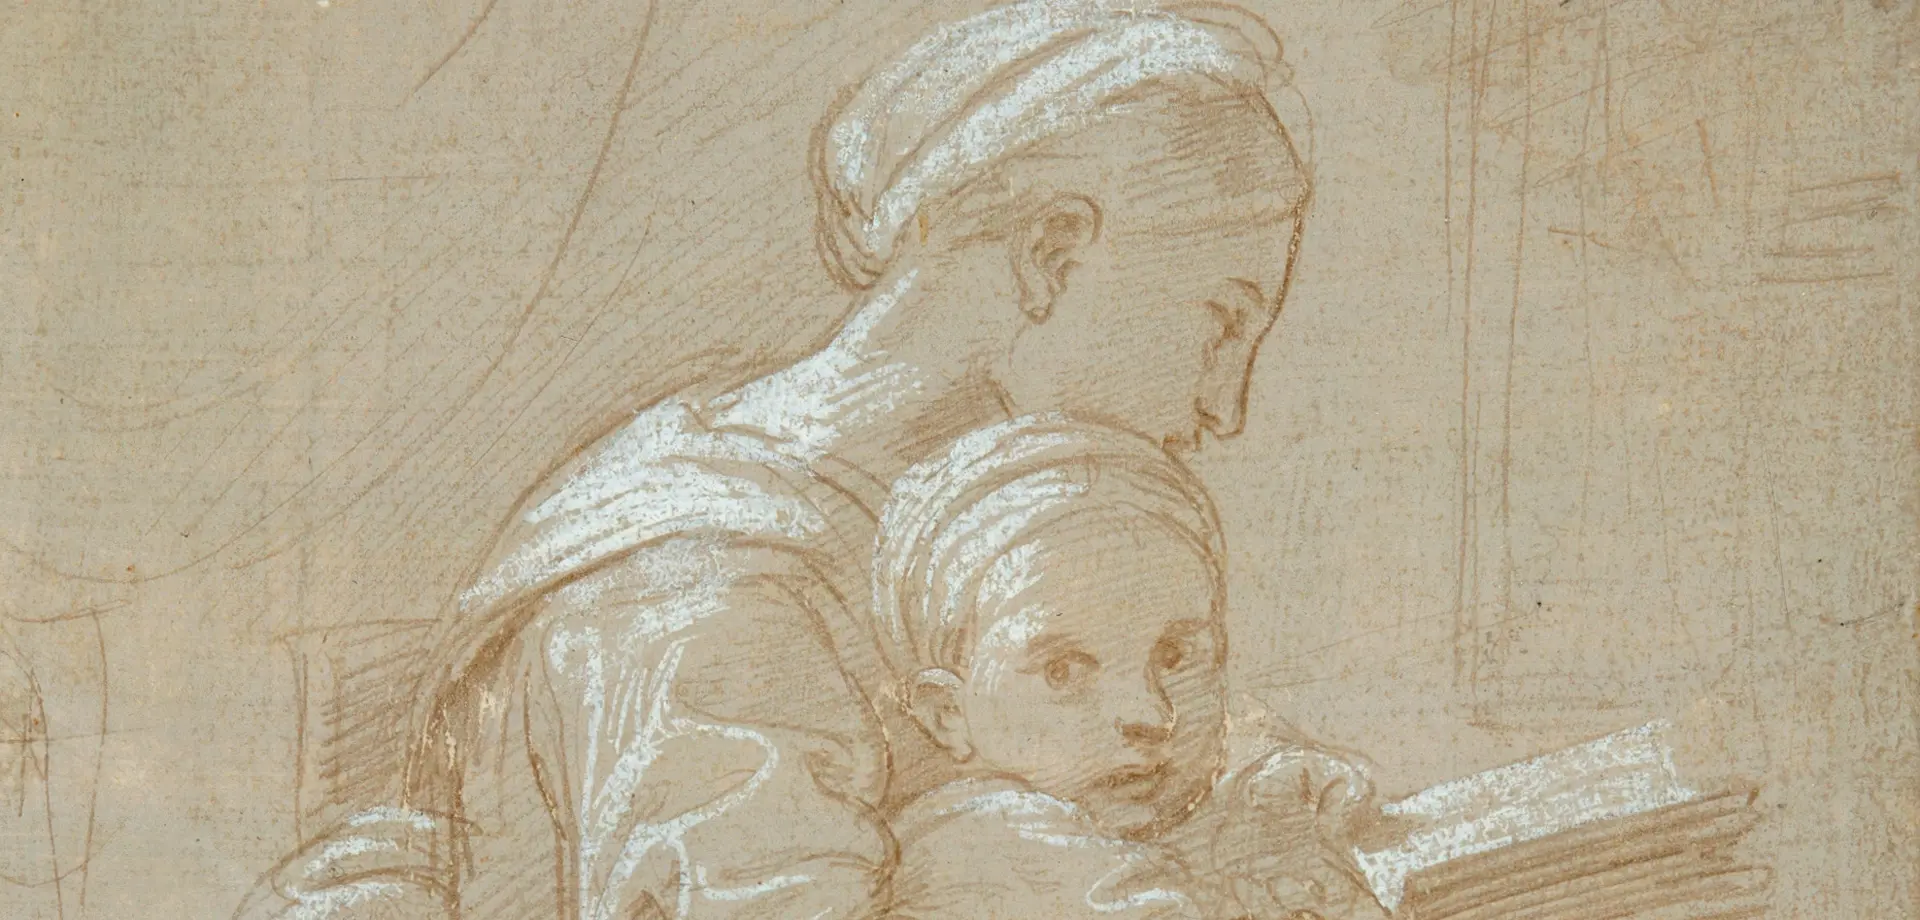 Seated Woman Reading with Child